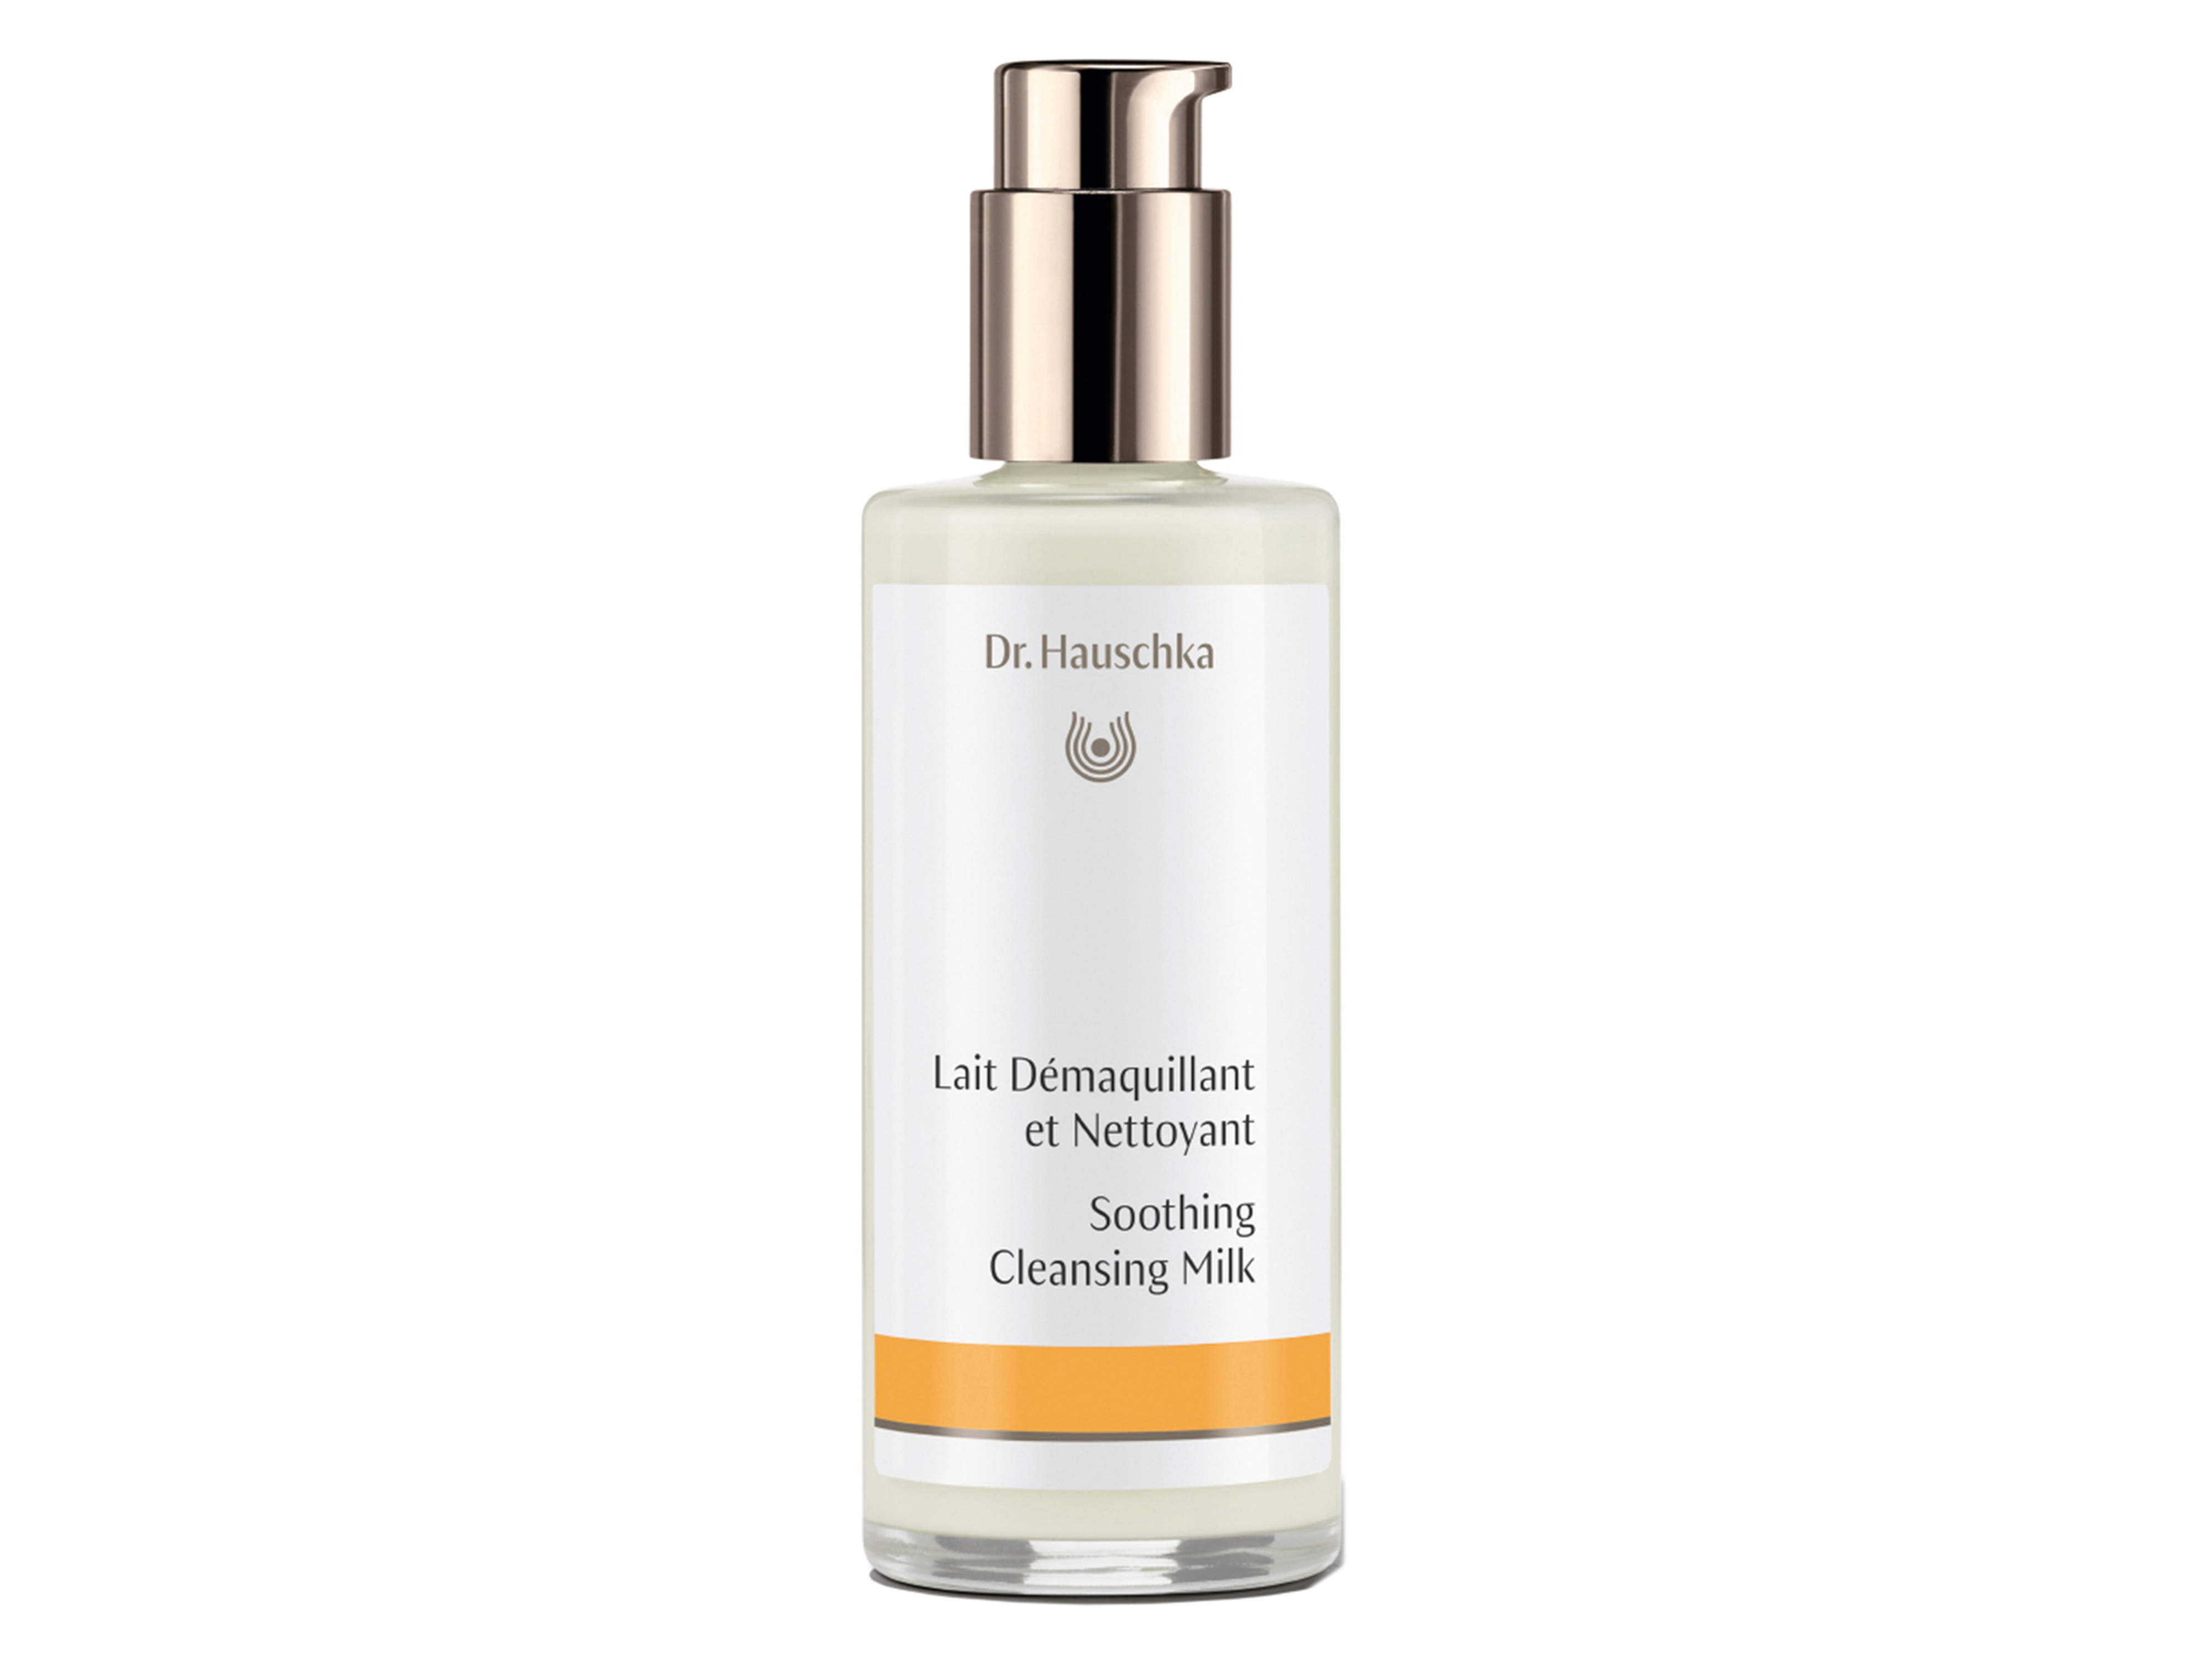 Dr. Hauschka Soothing Cleansing Milk, 145 ml